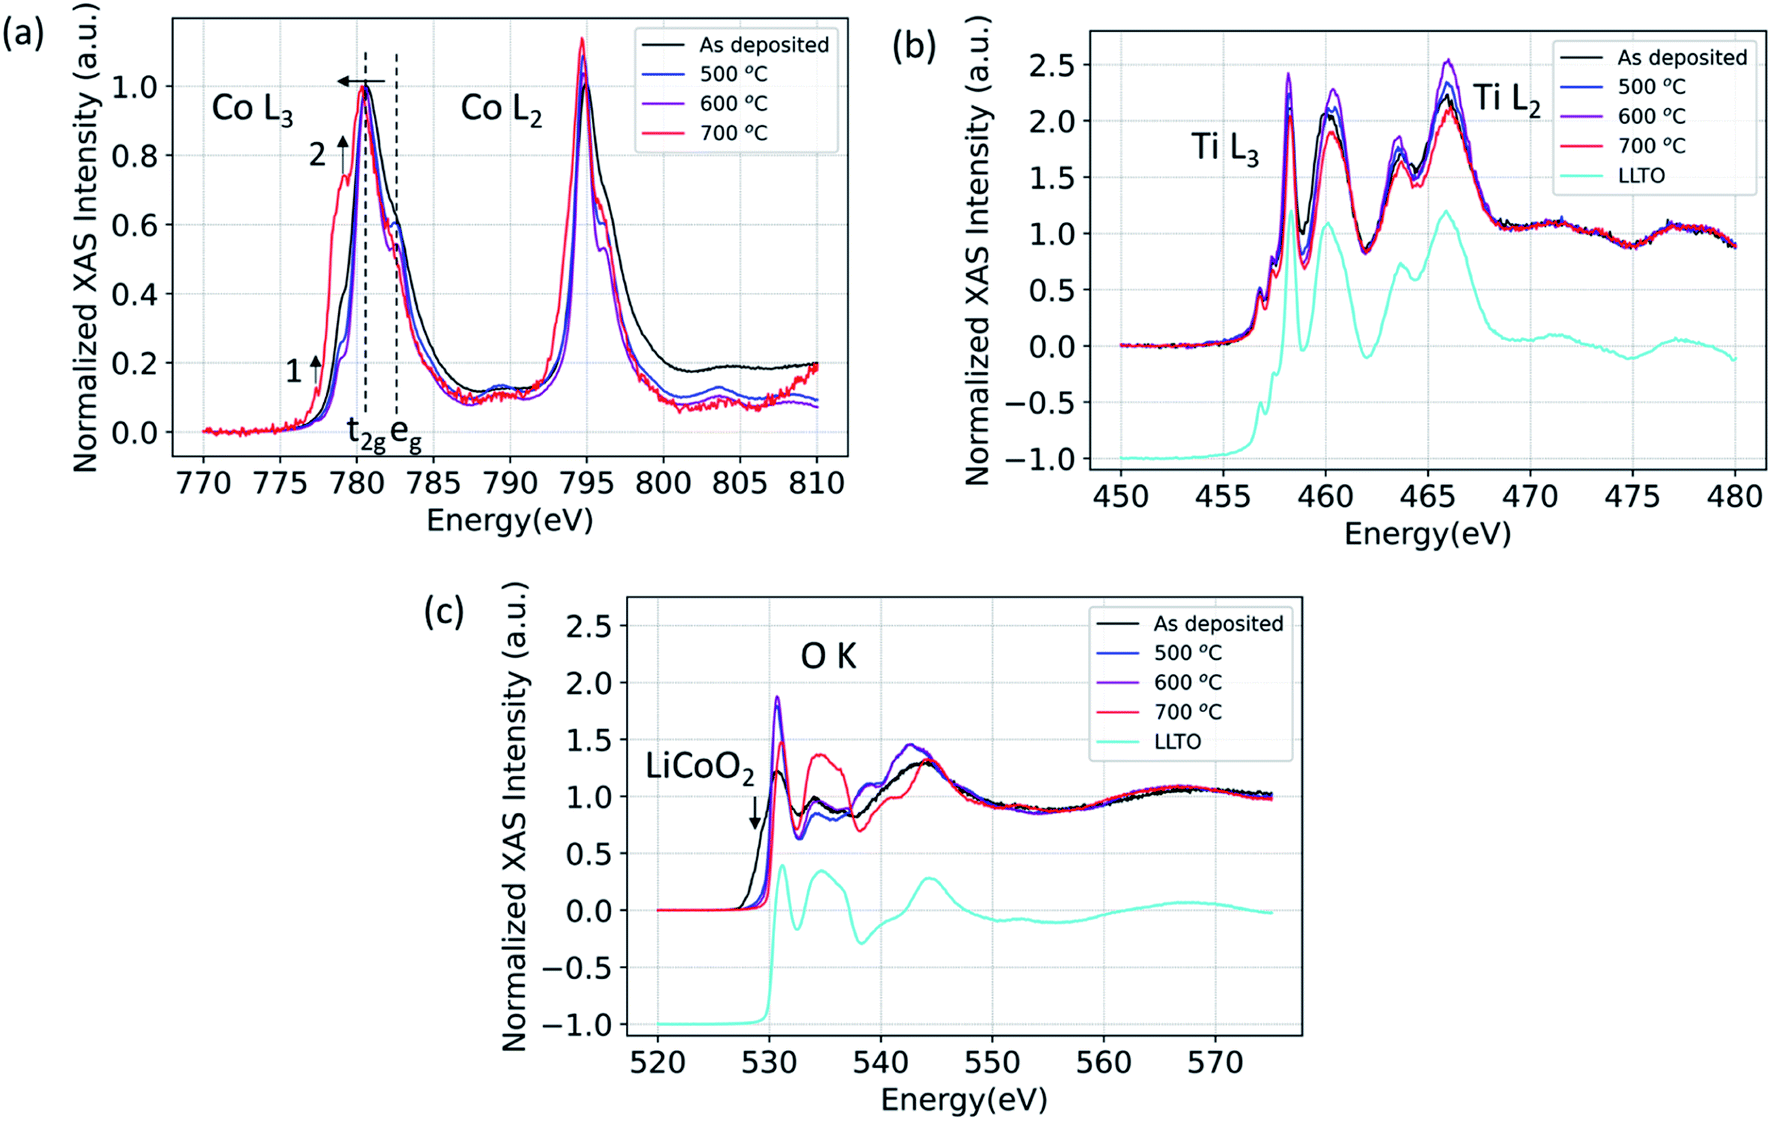 Thermally-driven reactivity of Li0.35La0.55TiO3 solid electrolyte with LiCoO2 cathode